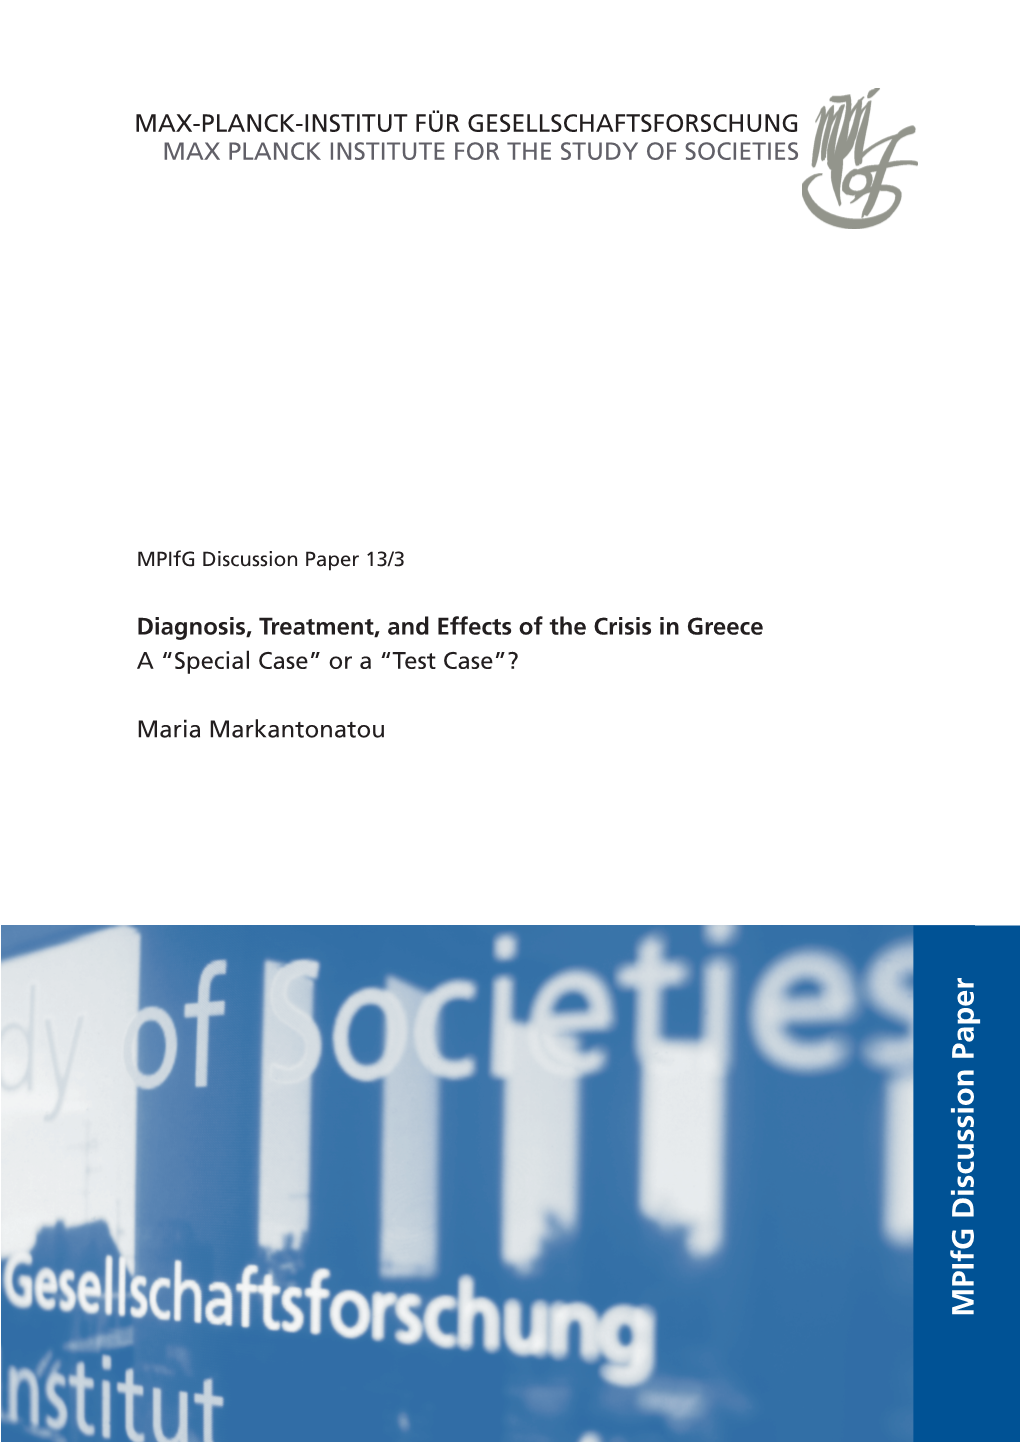 Diagnosis, Treatment, and Effects of the Crisis in Greece: a “Special Case” Or a “Test Case”?